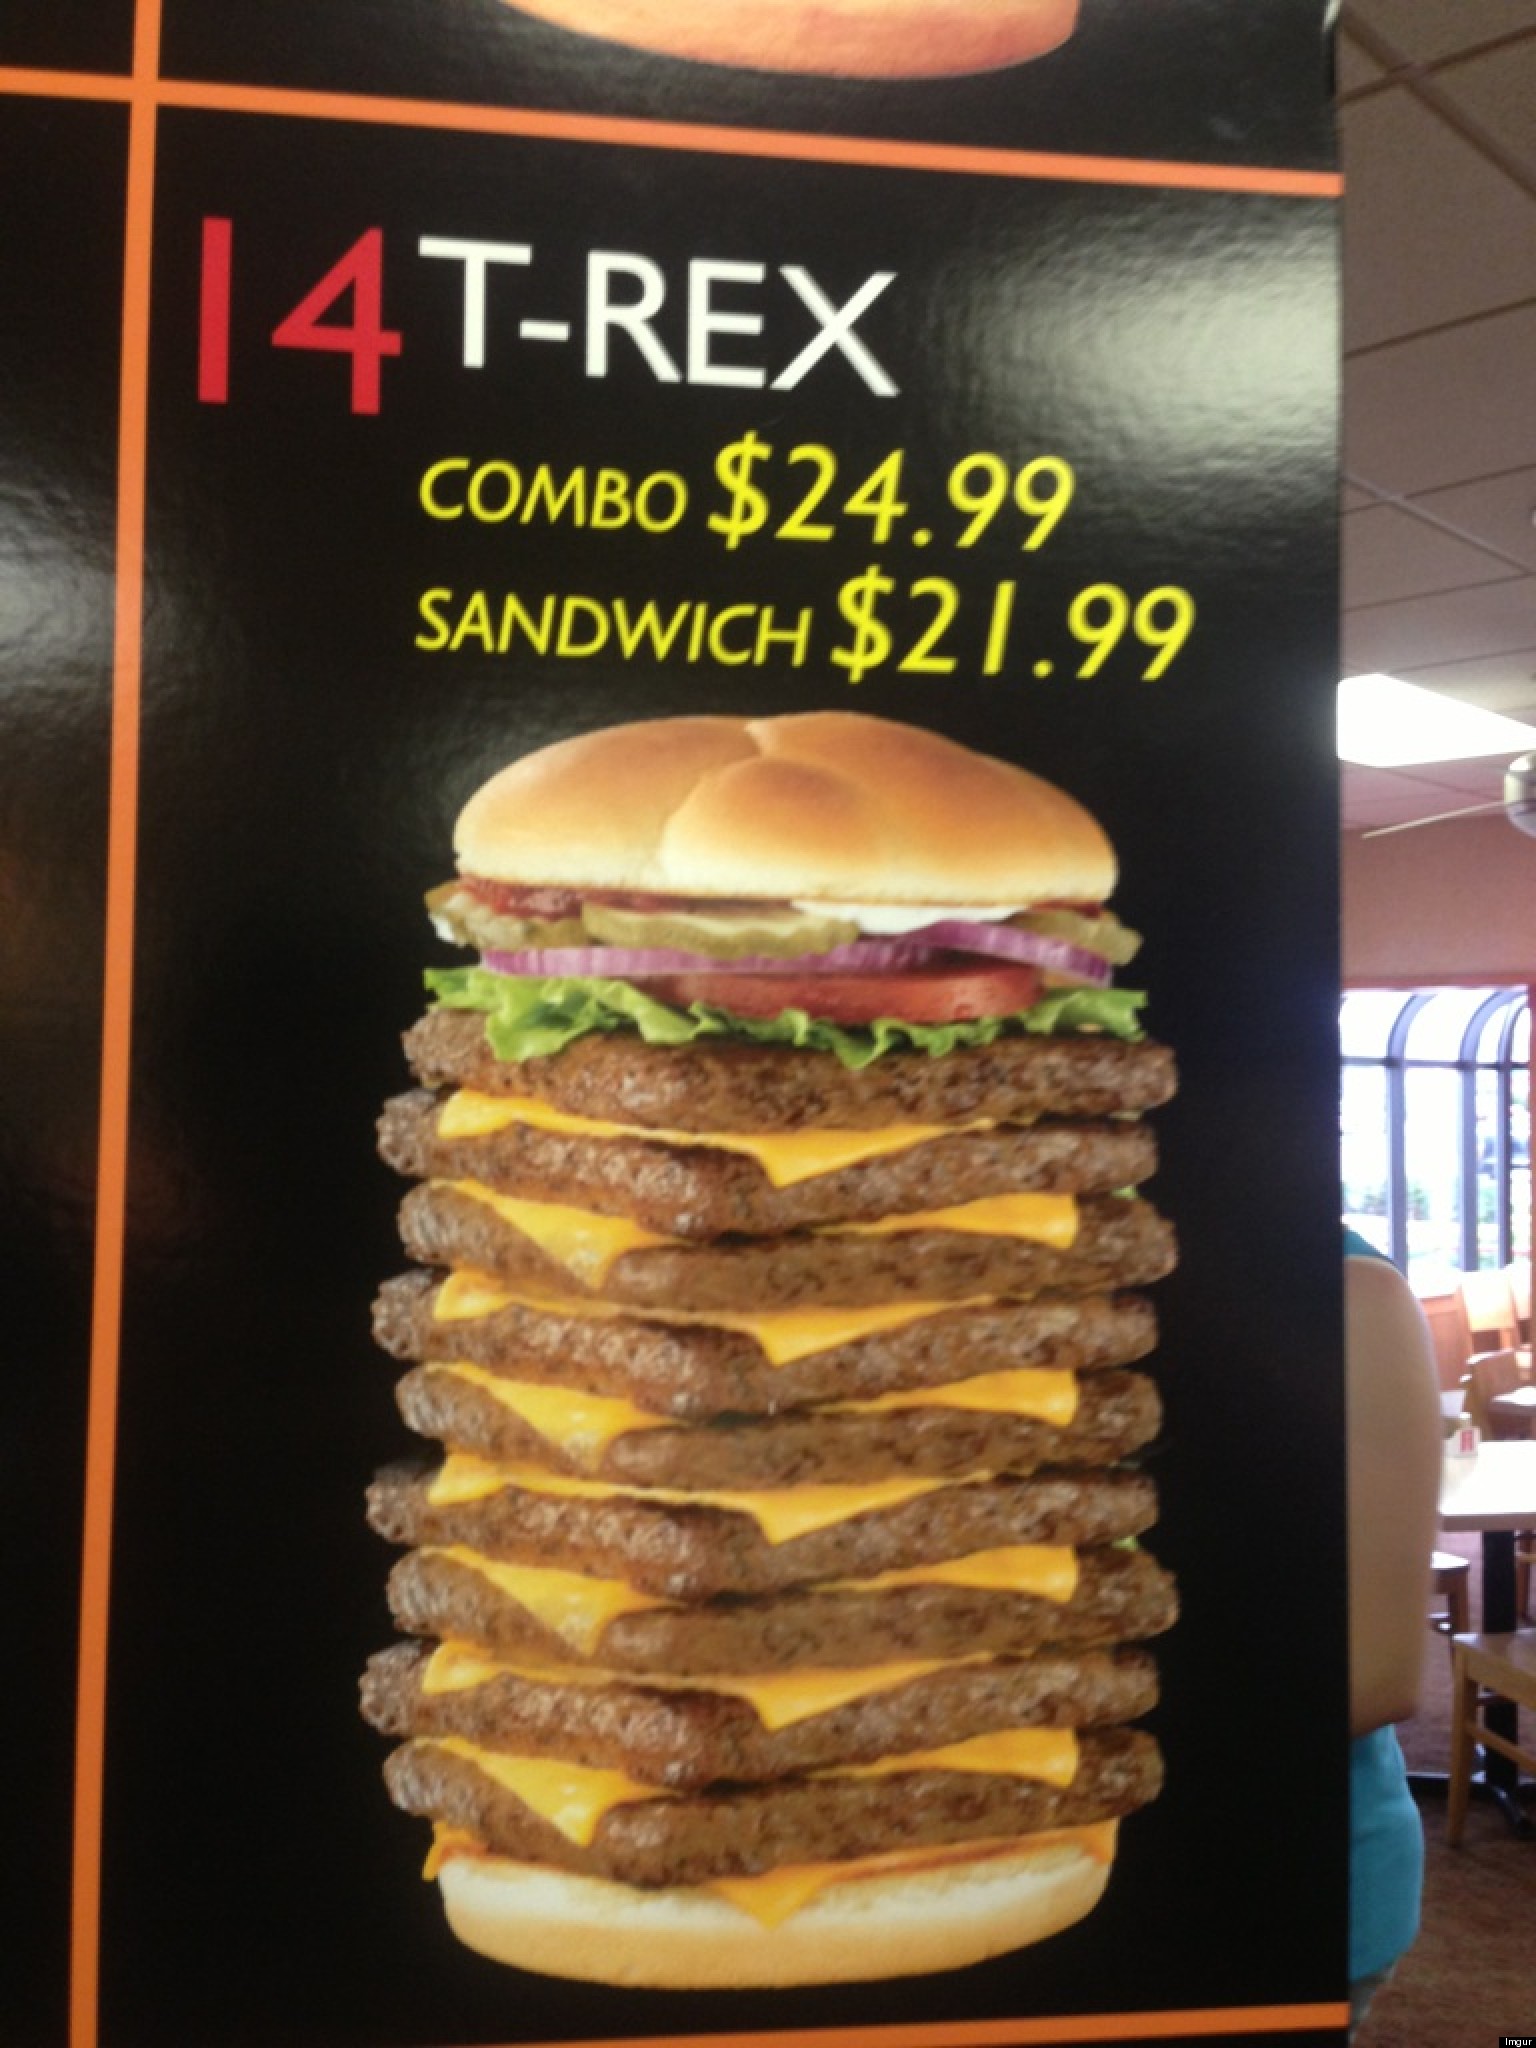 Wendy's 'TRex' Burger Features 9 Patties And Odd Origin Story (PHOTO